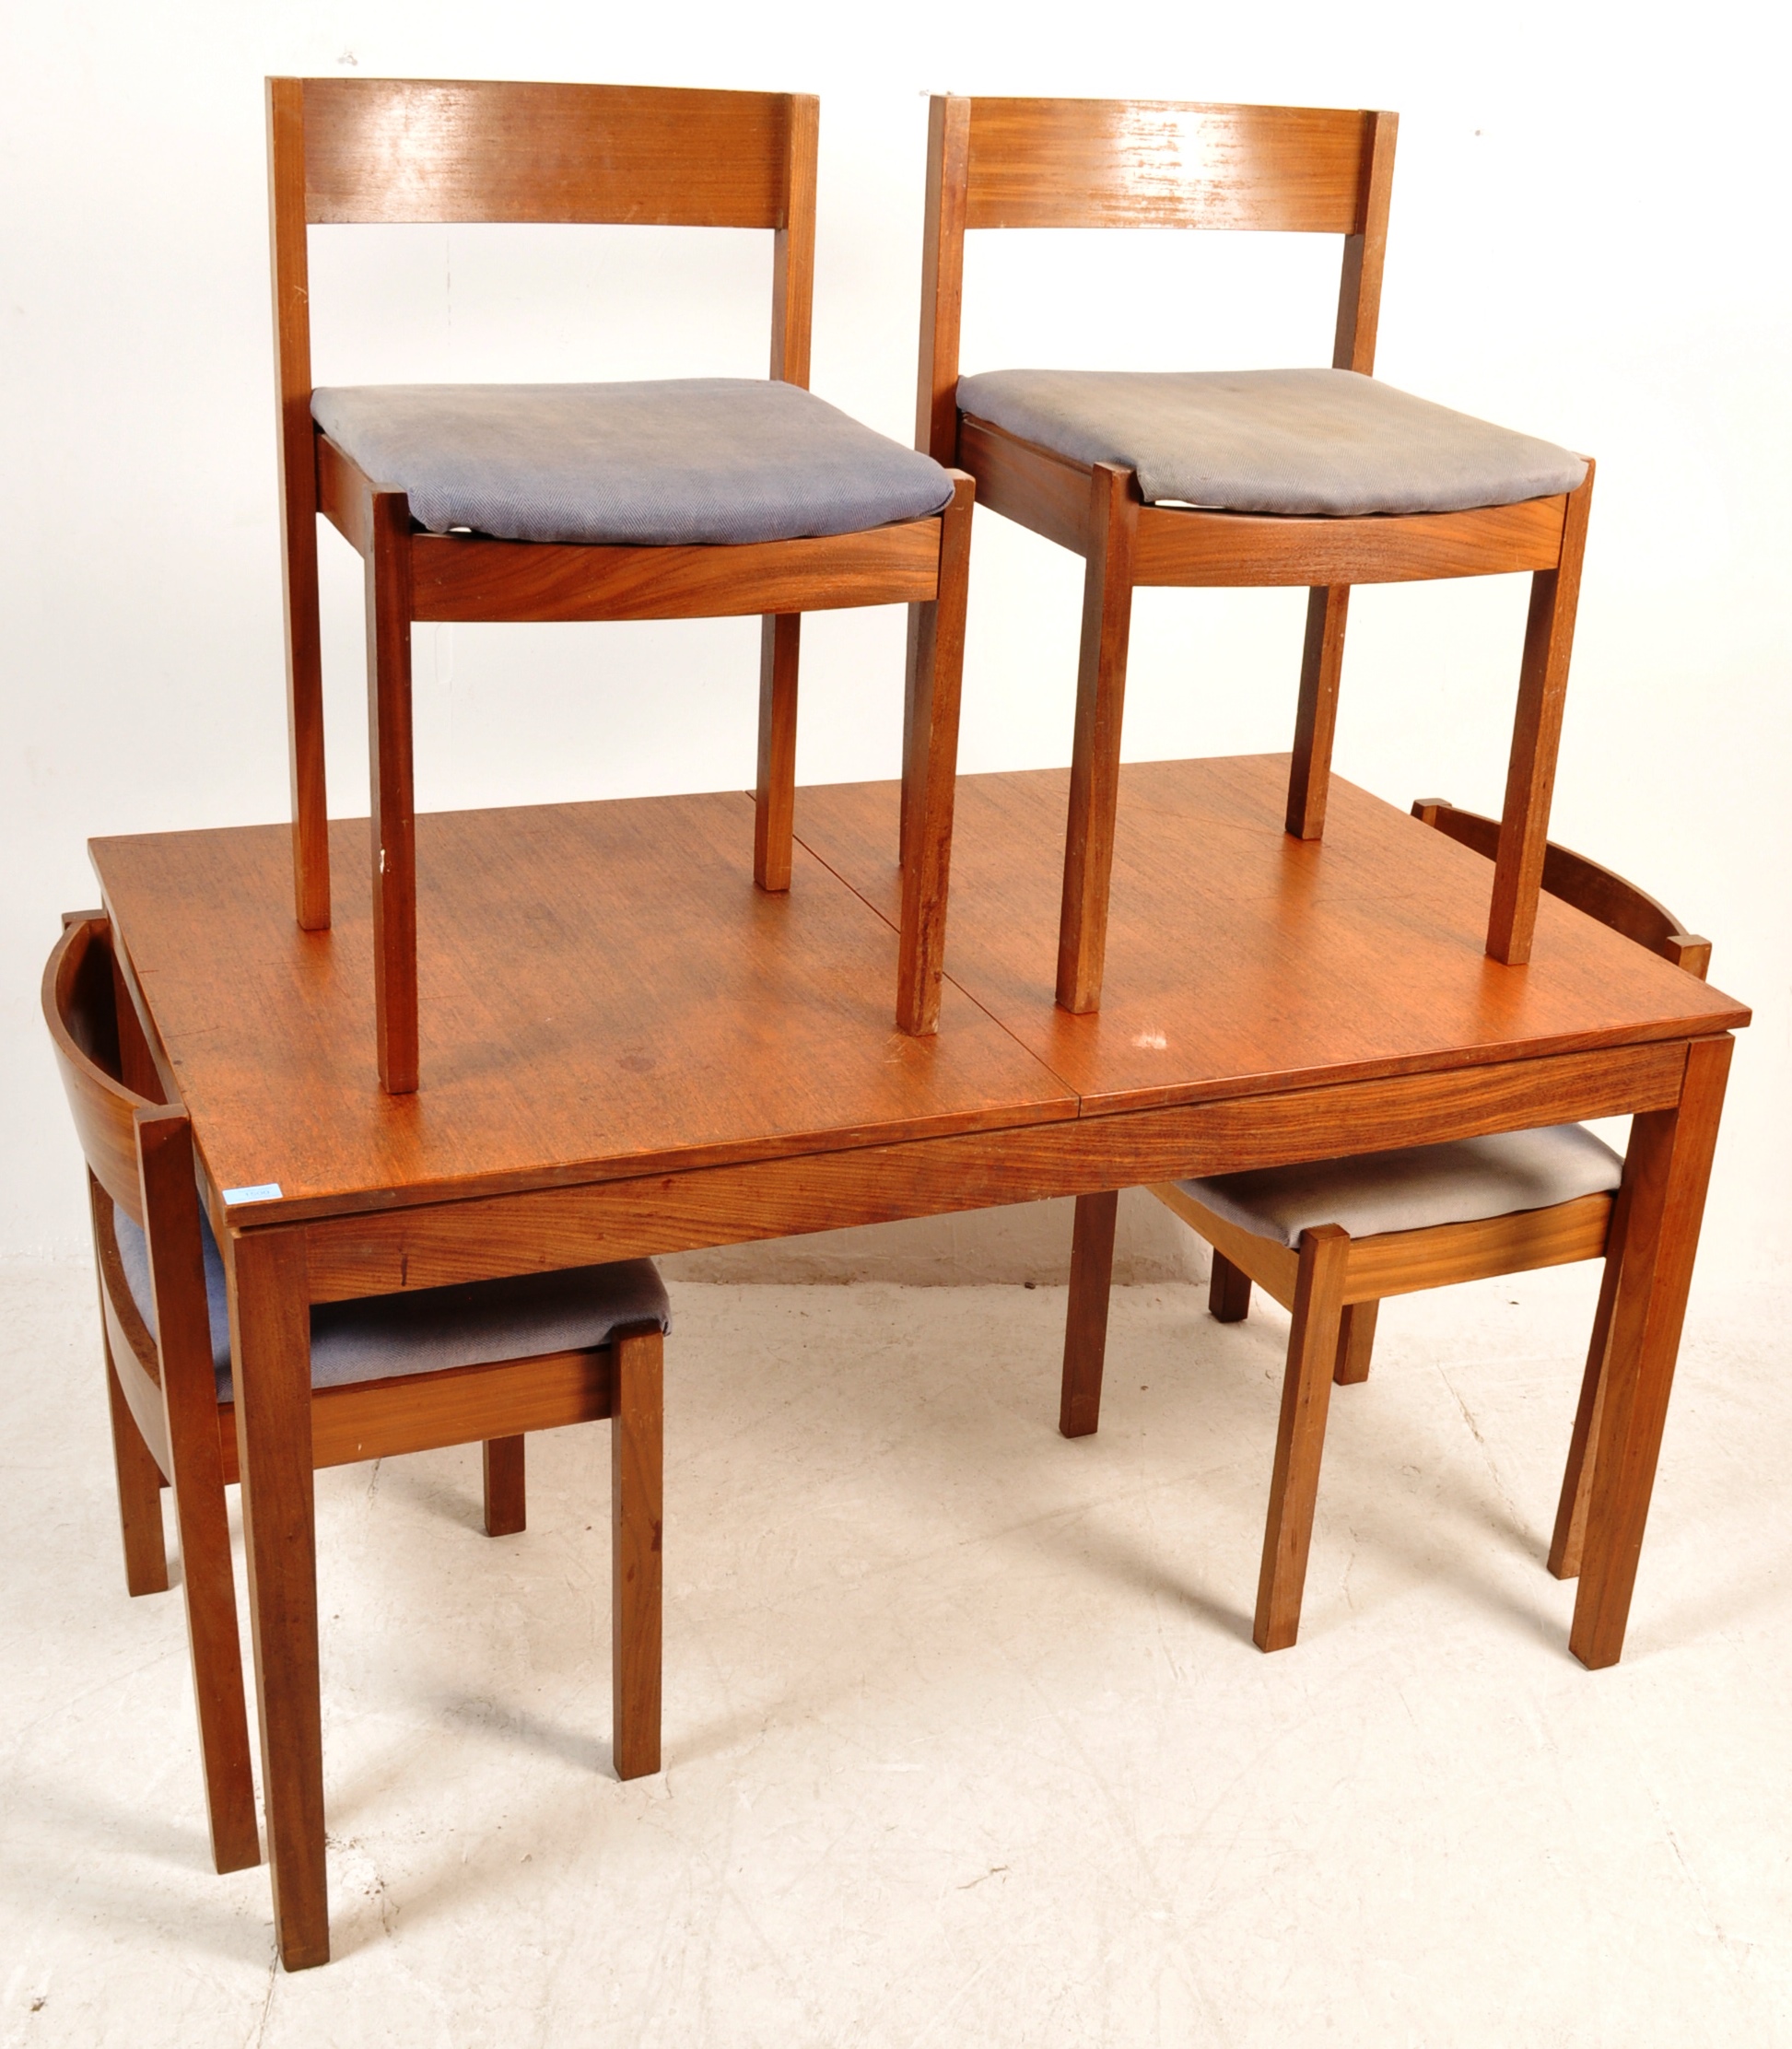 MEREDEW - BRITISH MODERN DESIGN - RETRO VINTAGE TABLE AND CHAIRS - Image 2 of 8